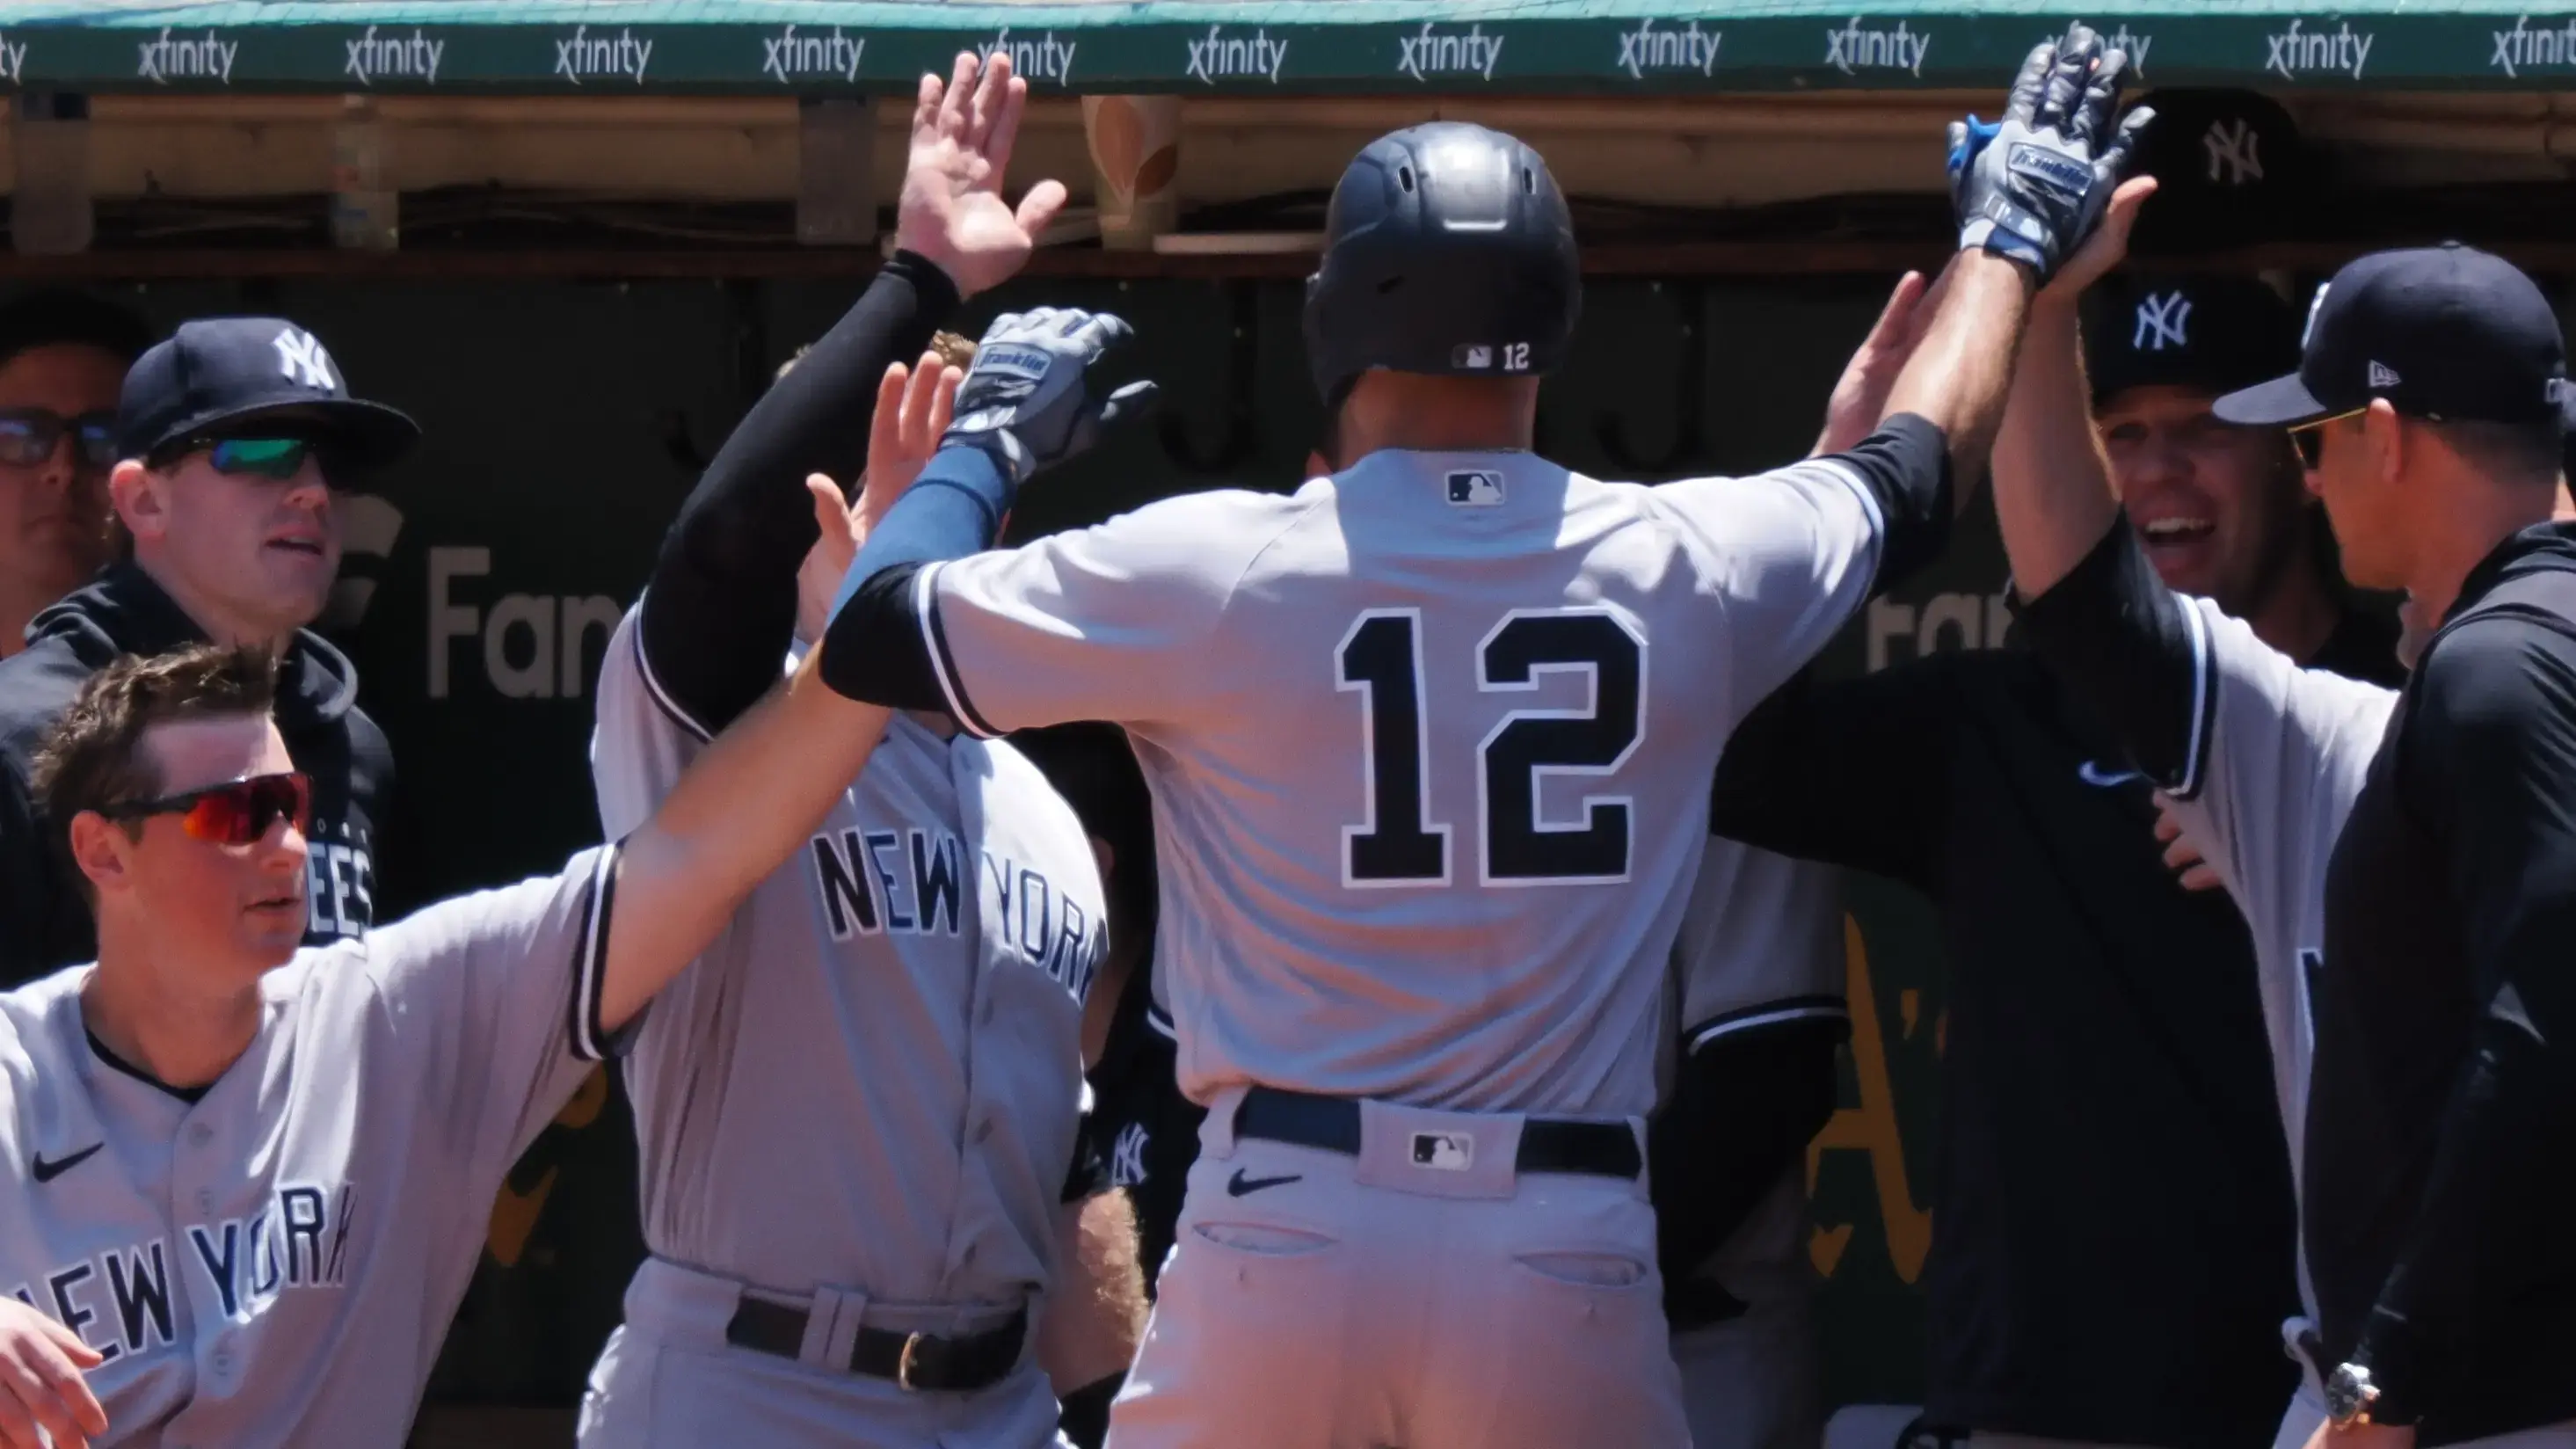 New York Yankees left fielder Isiah Kiner-Falefa (12) high fives teammates after hitting a solo home run against the Oakland Athletics during the second inning at Oakland-Alameda County Coliseum / Kelley L Cox - USA TODAY Sports